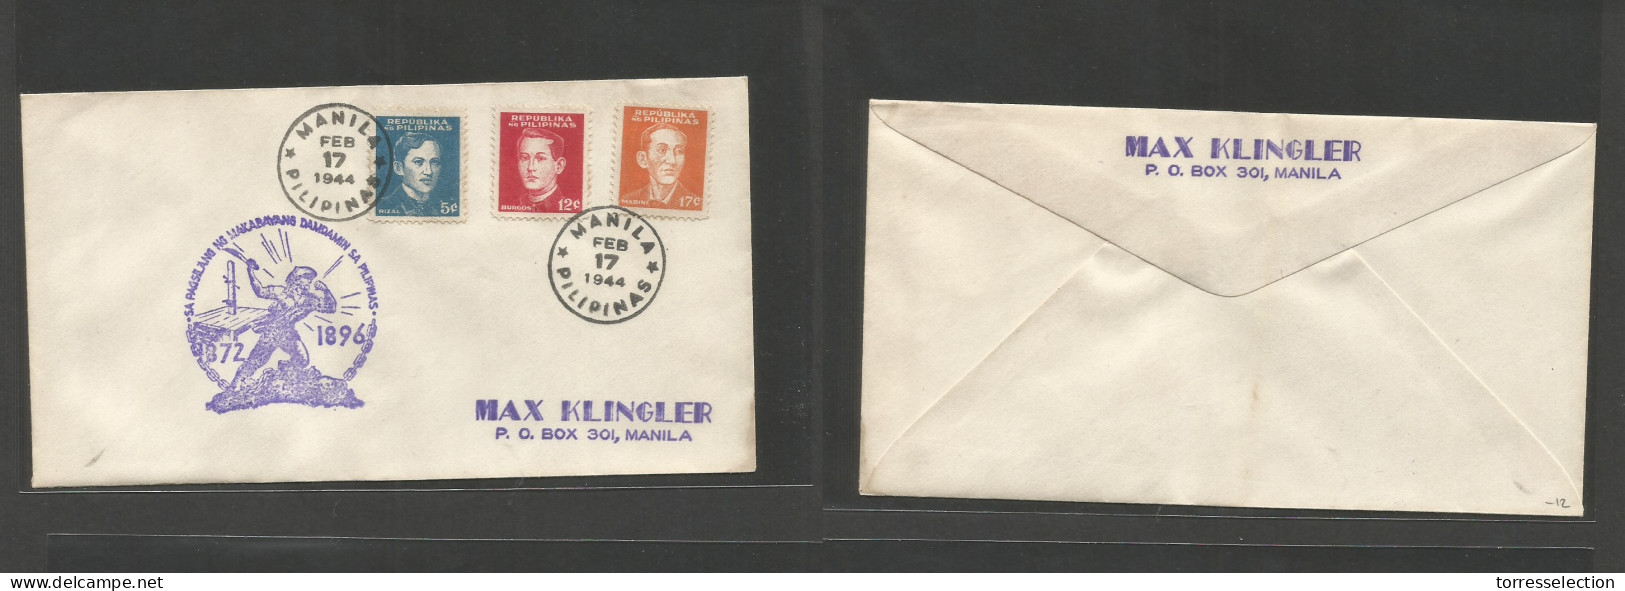 PHILIPPINES. 1944 (17 Febr) Japanese Occup. Local Printed Usage. Special Cachet. Multifkd Env. SALE. - Philippinen